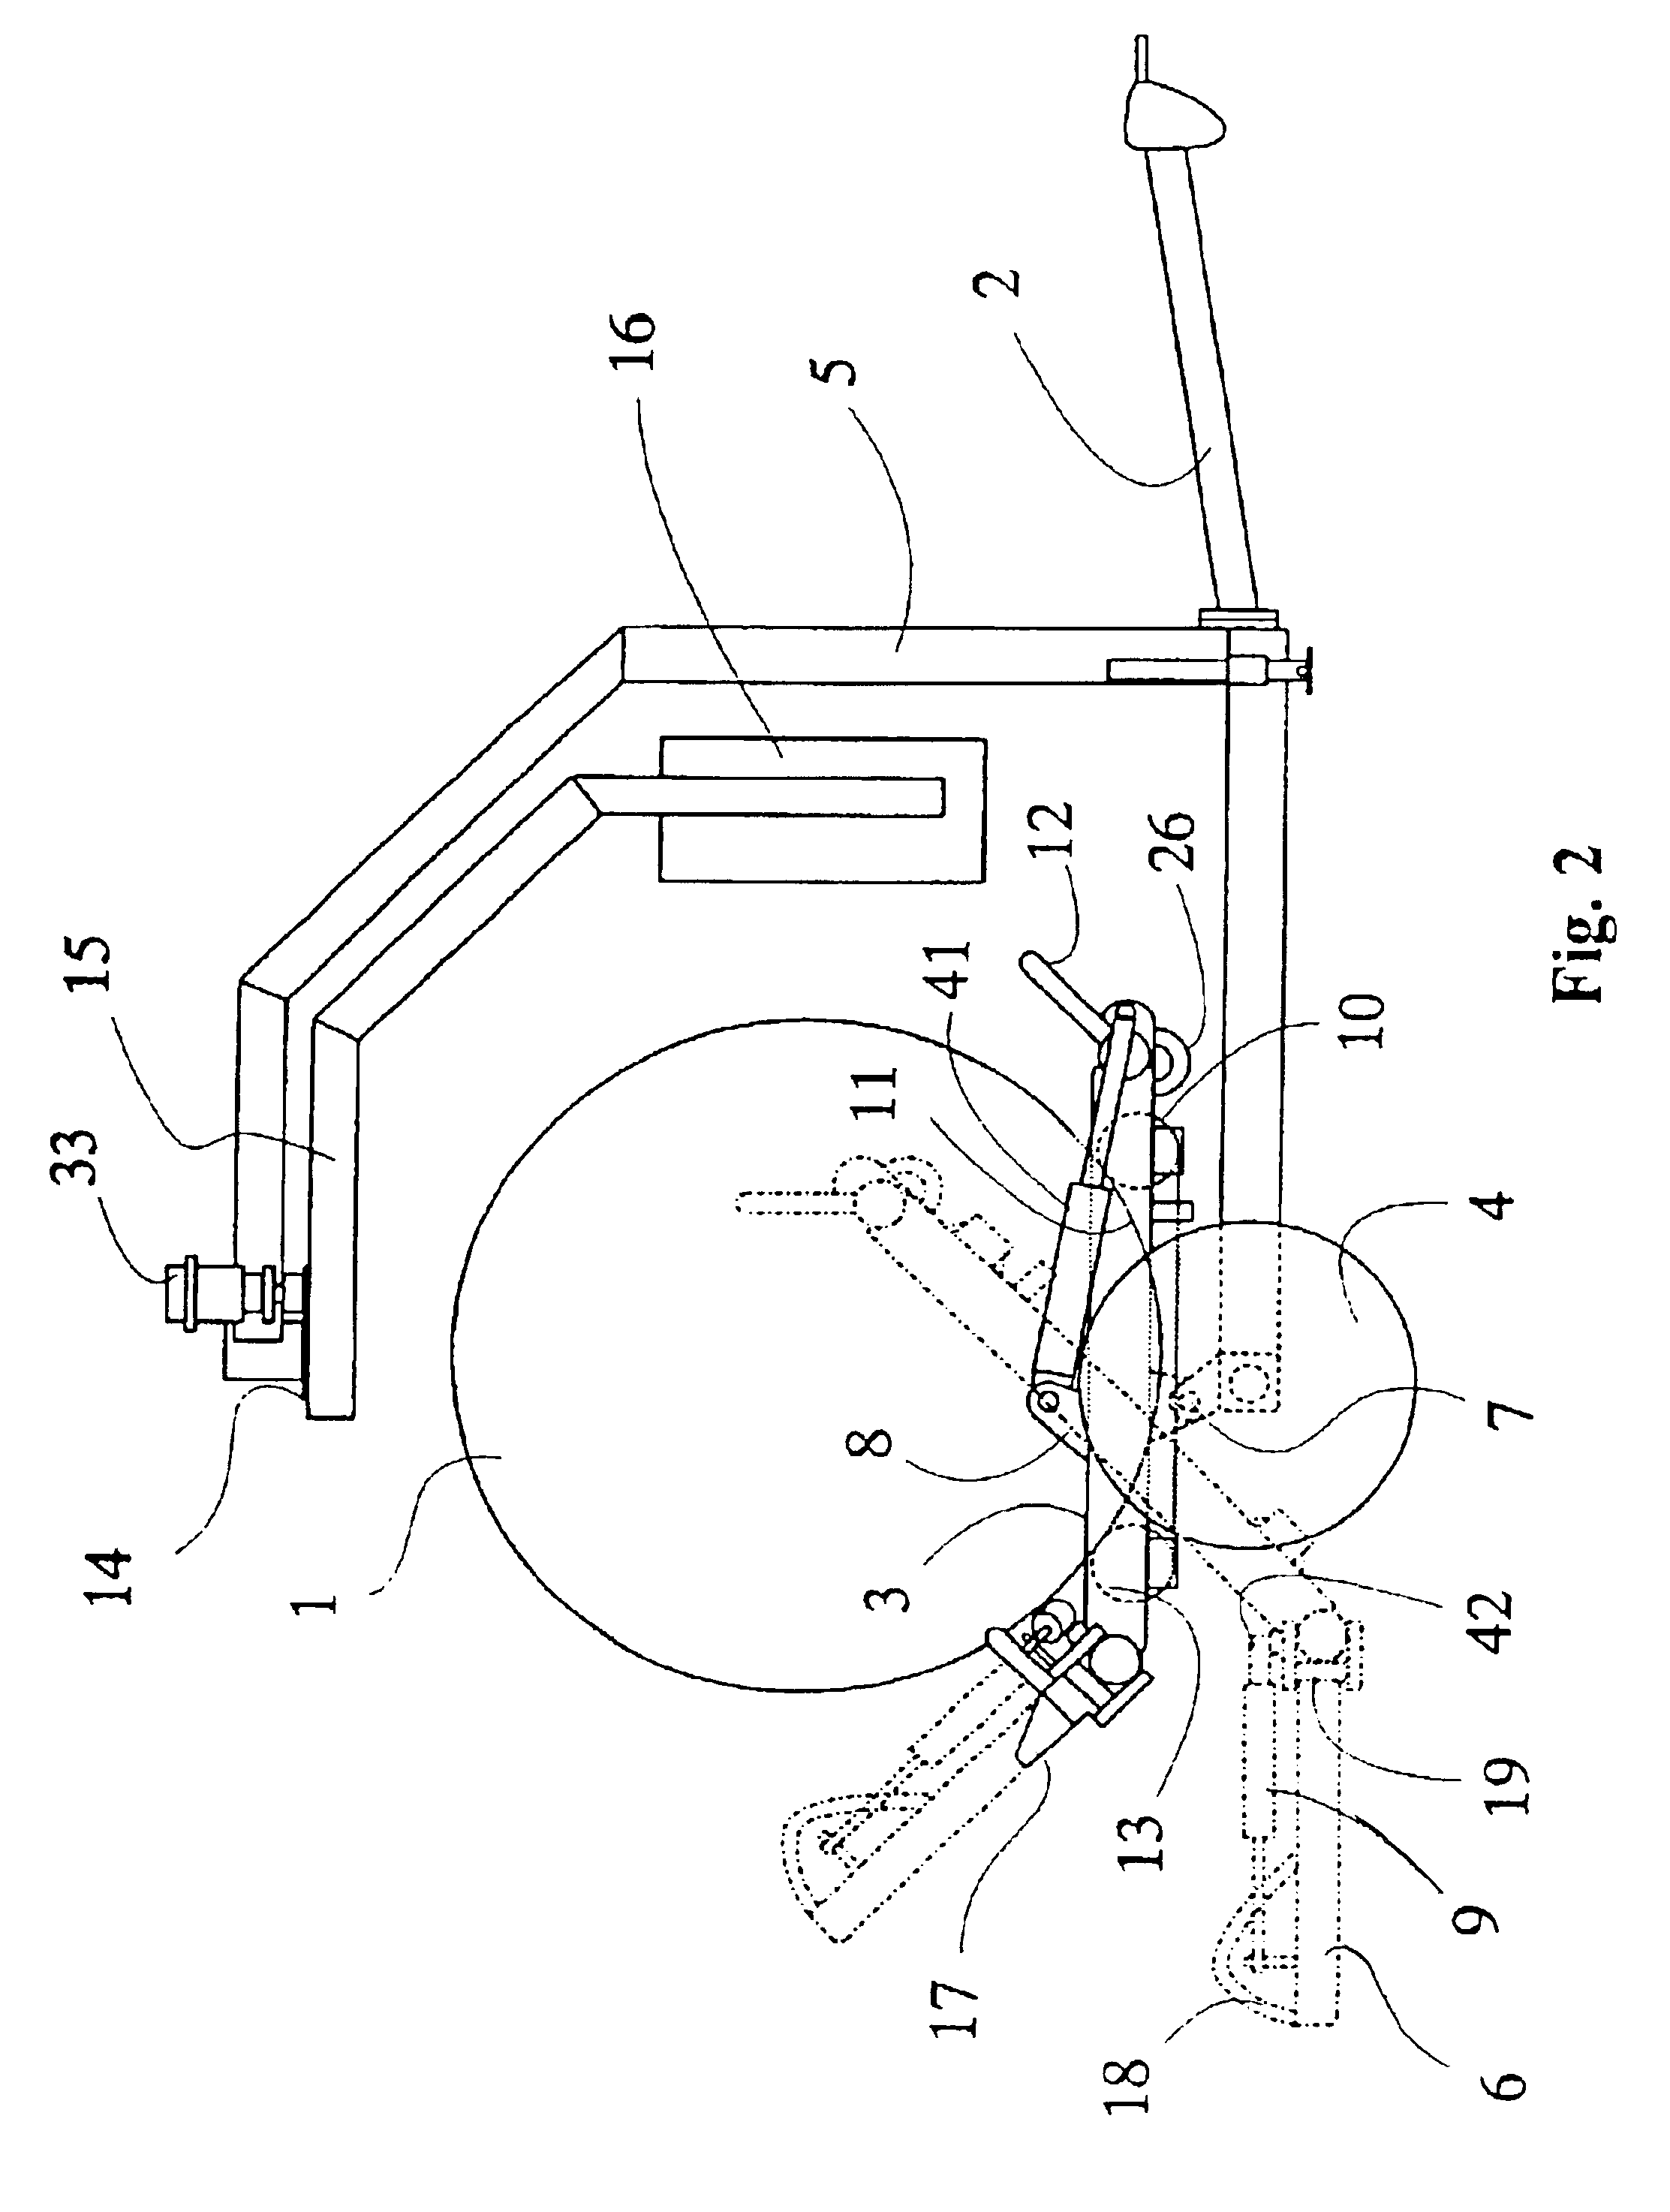 Procedure and apparatus for wrapping a fodder bale with plastic